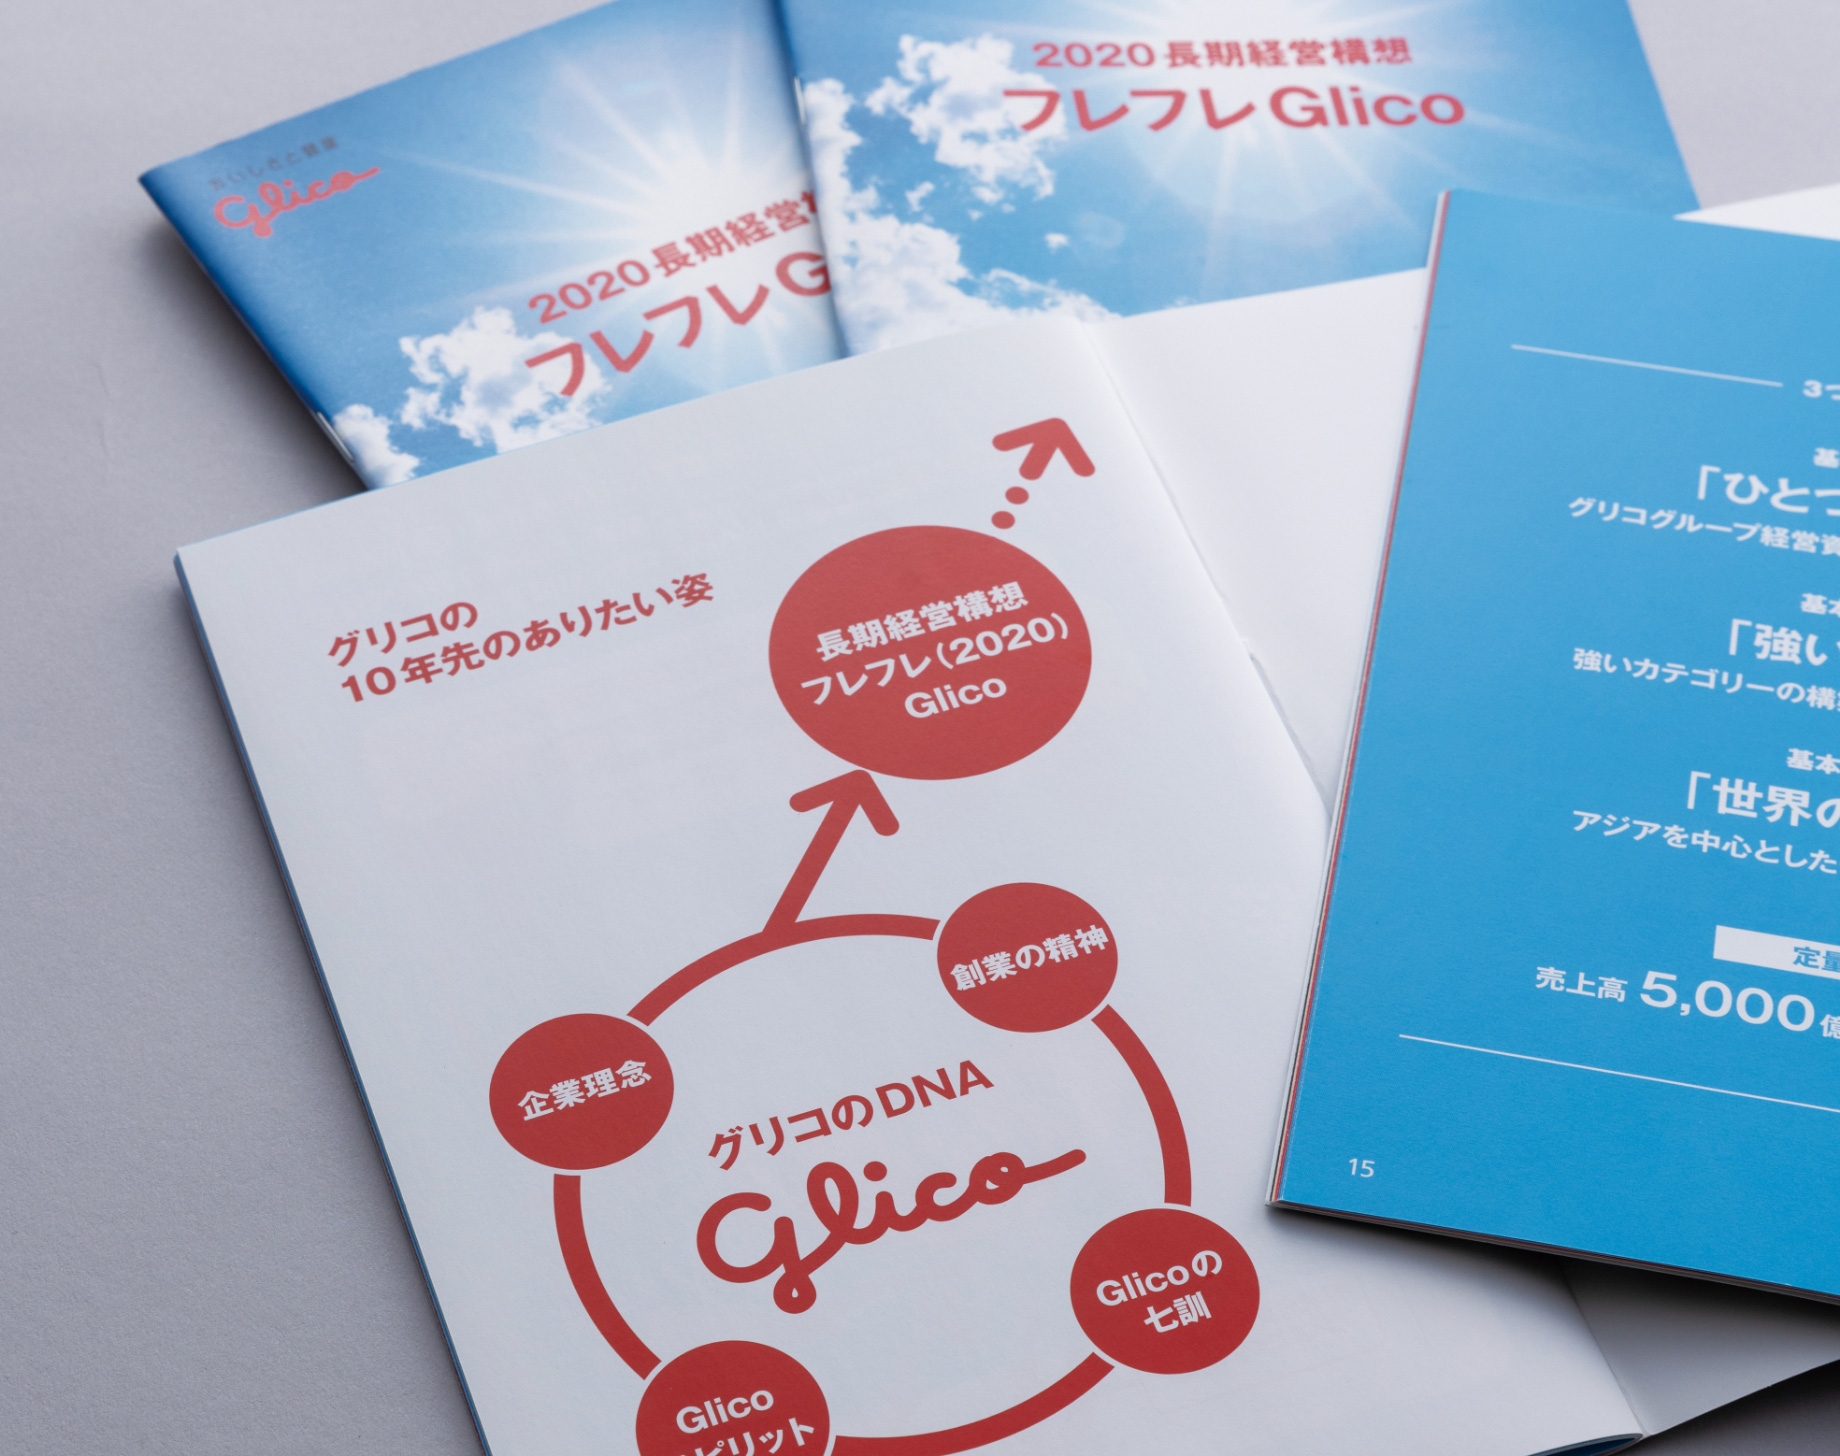 Glico’s first long-term strategy booklet was distributed to all group employees